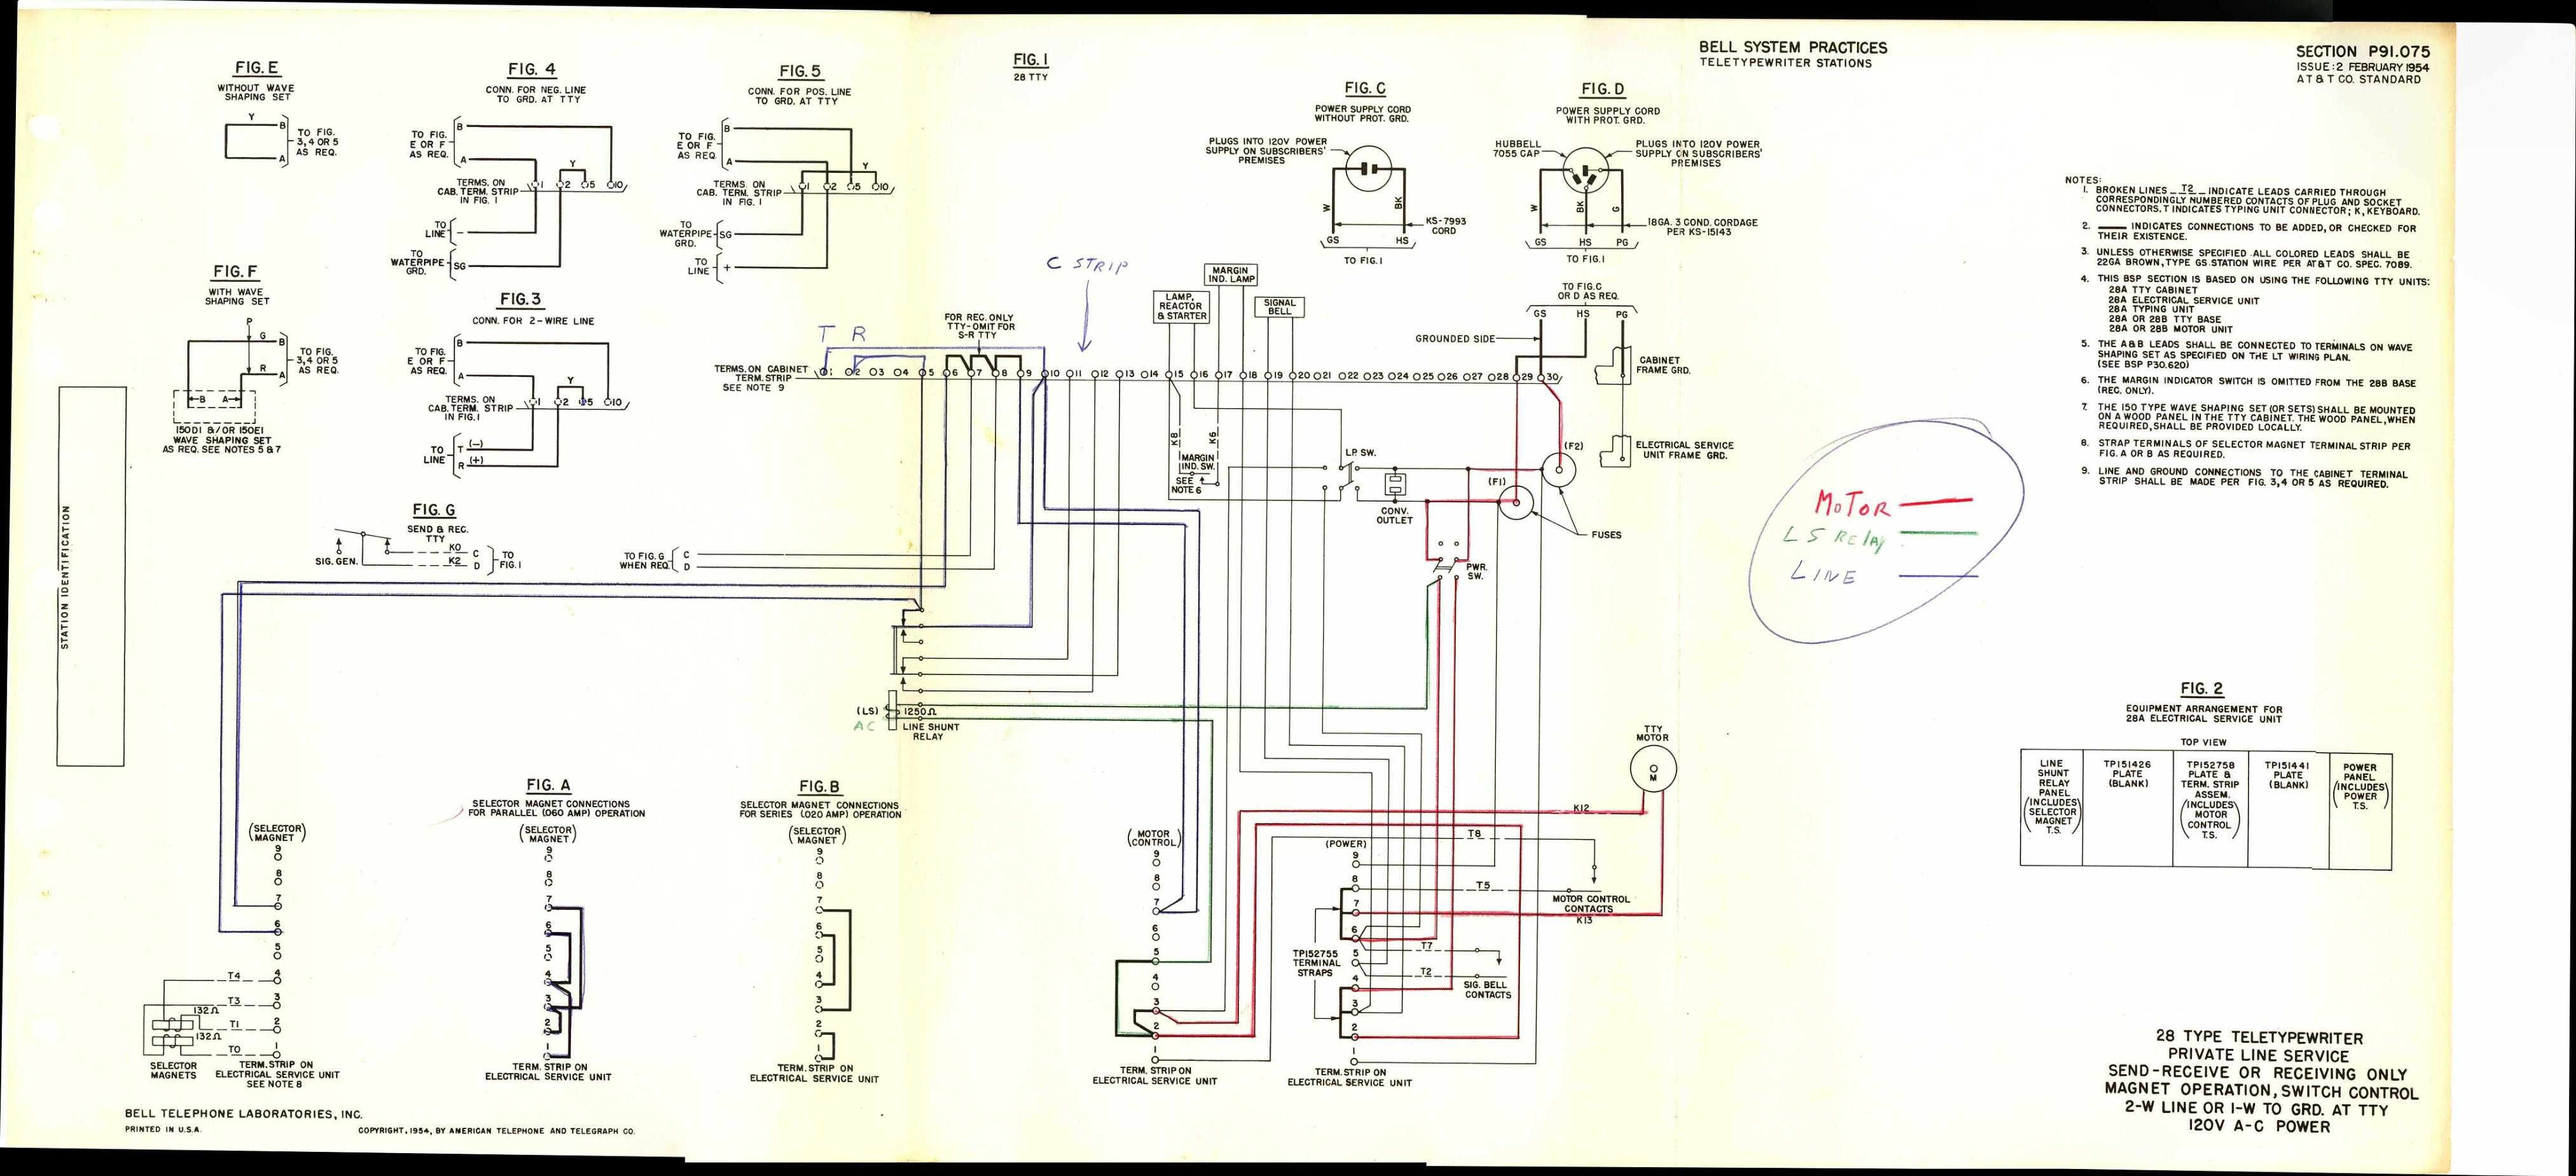 Teletype Wiring Diagrams And Schematics 35d Wiring Diagram 5 35d Wiring Diagram